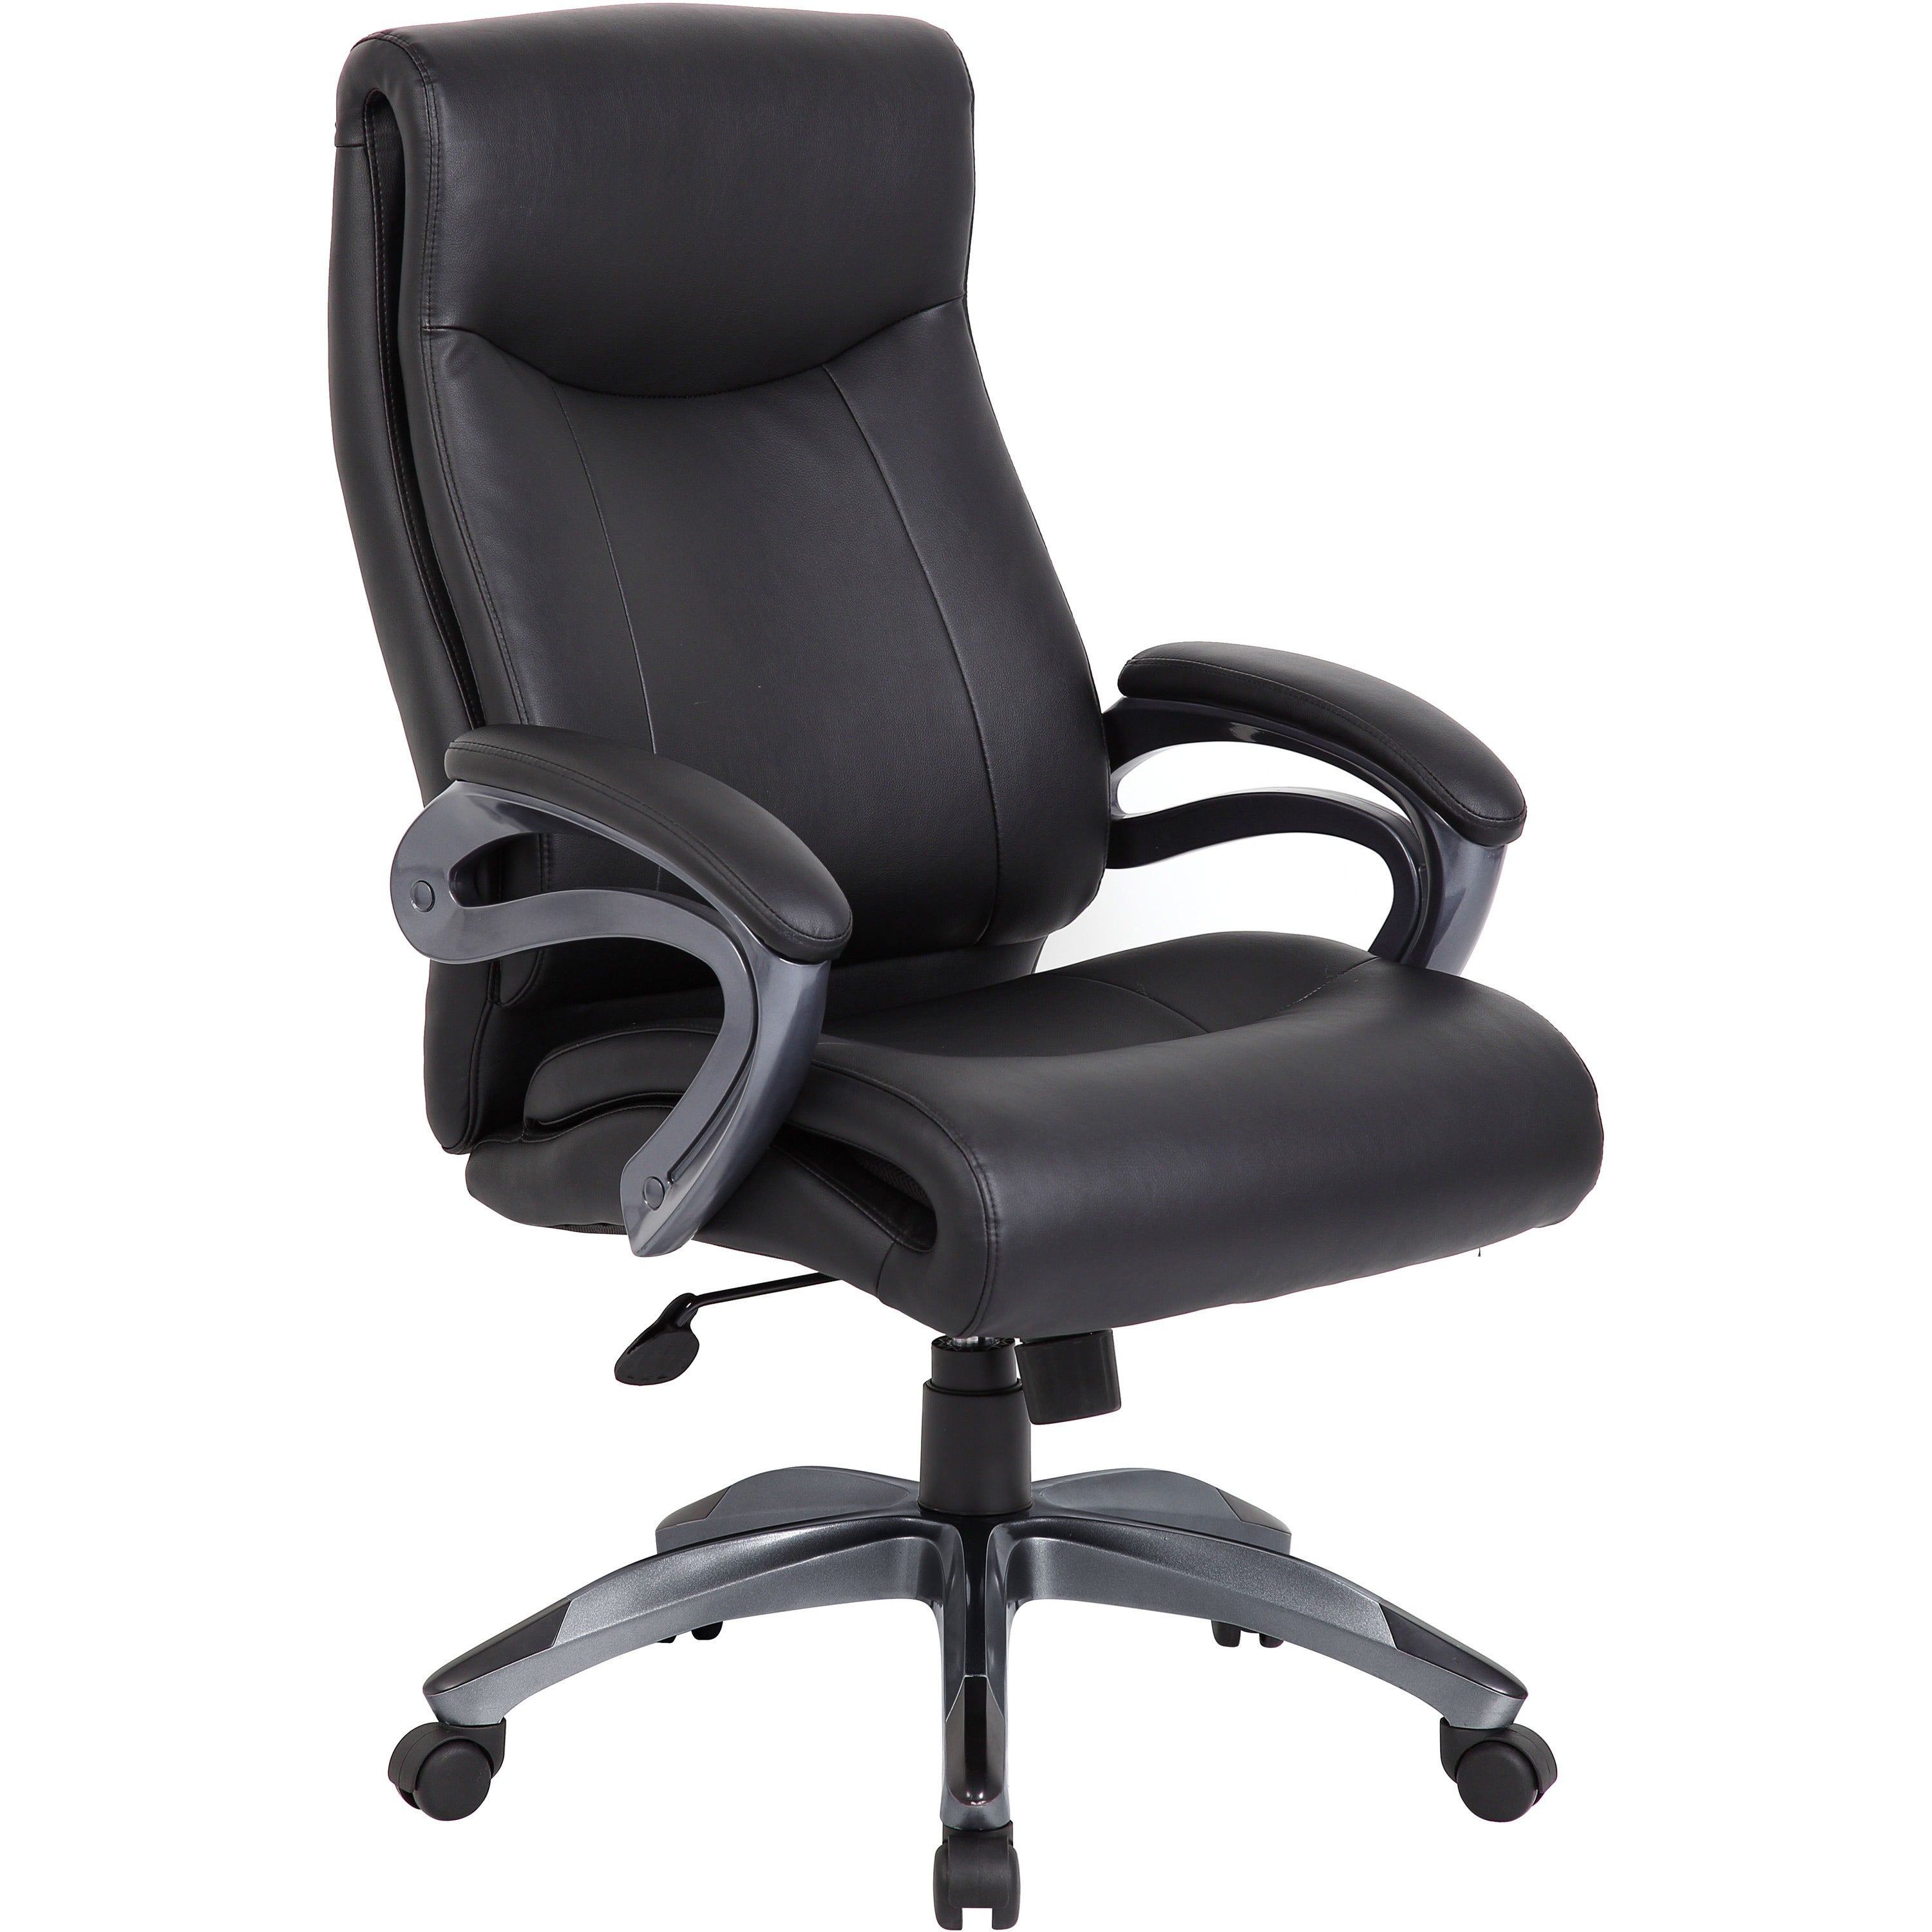 Lorell Executive High-Back Chair with Gun Metal Base - Black Leather Seat - 5-star Base - 1 Each - 